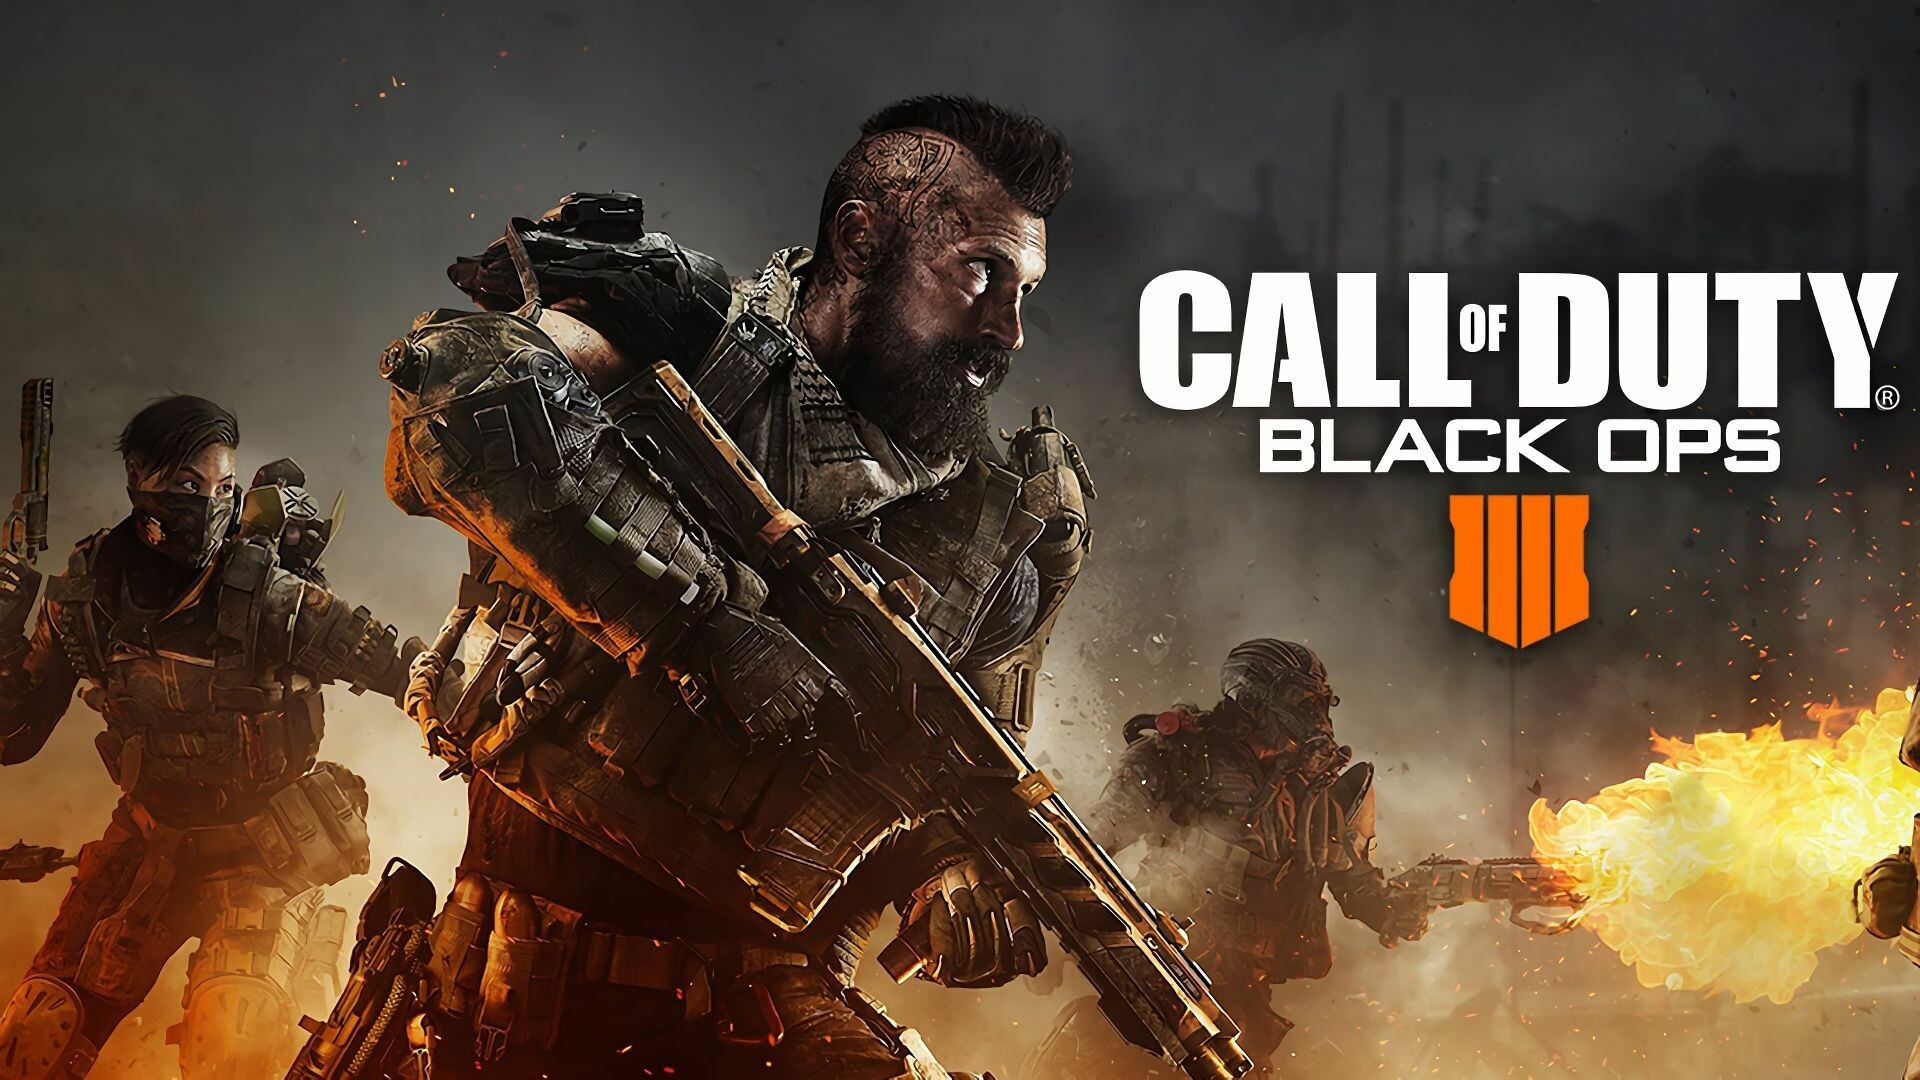 Call of Duty: CoD Black Ops 4, Game, featuring no traditional campaign mode for the first time in the franchise. 1920x1080 Full HD Background.